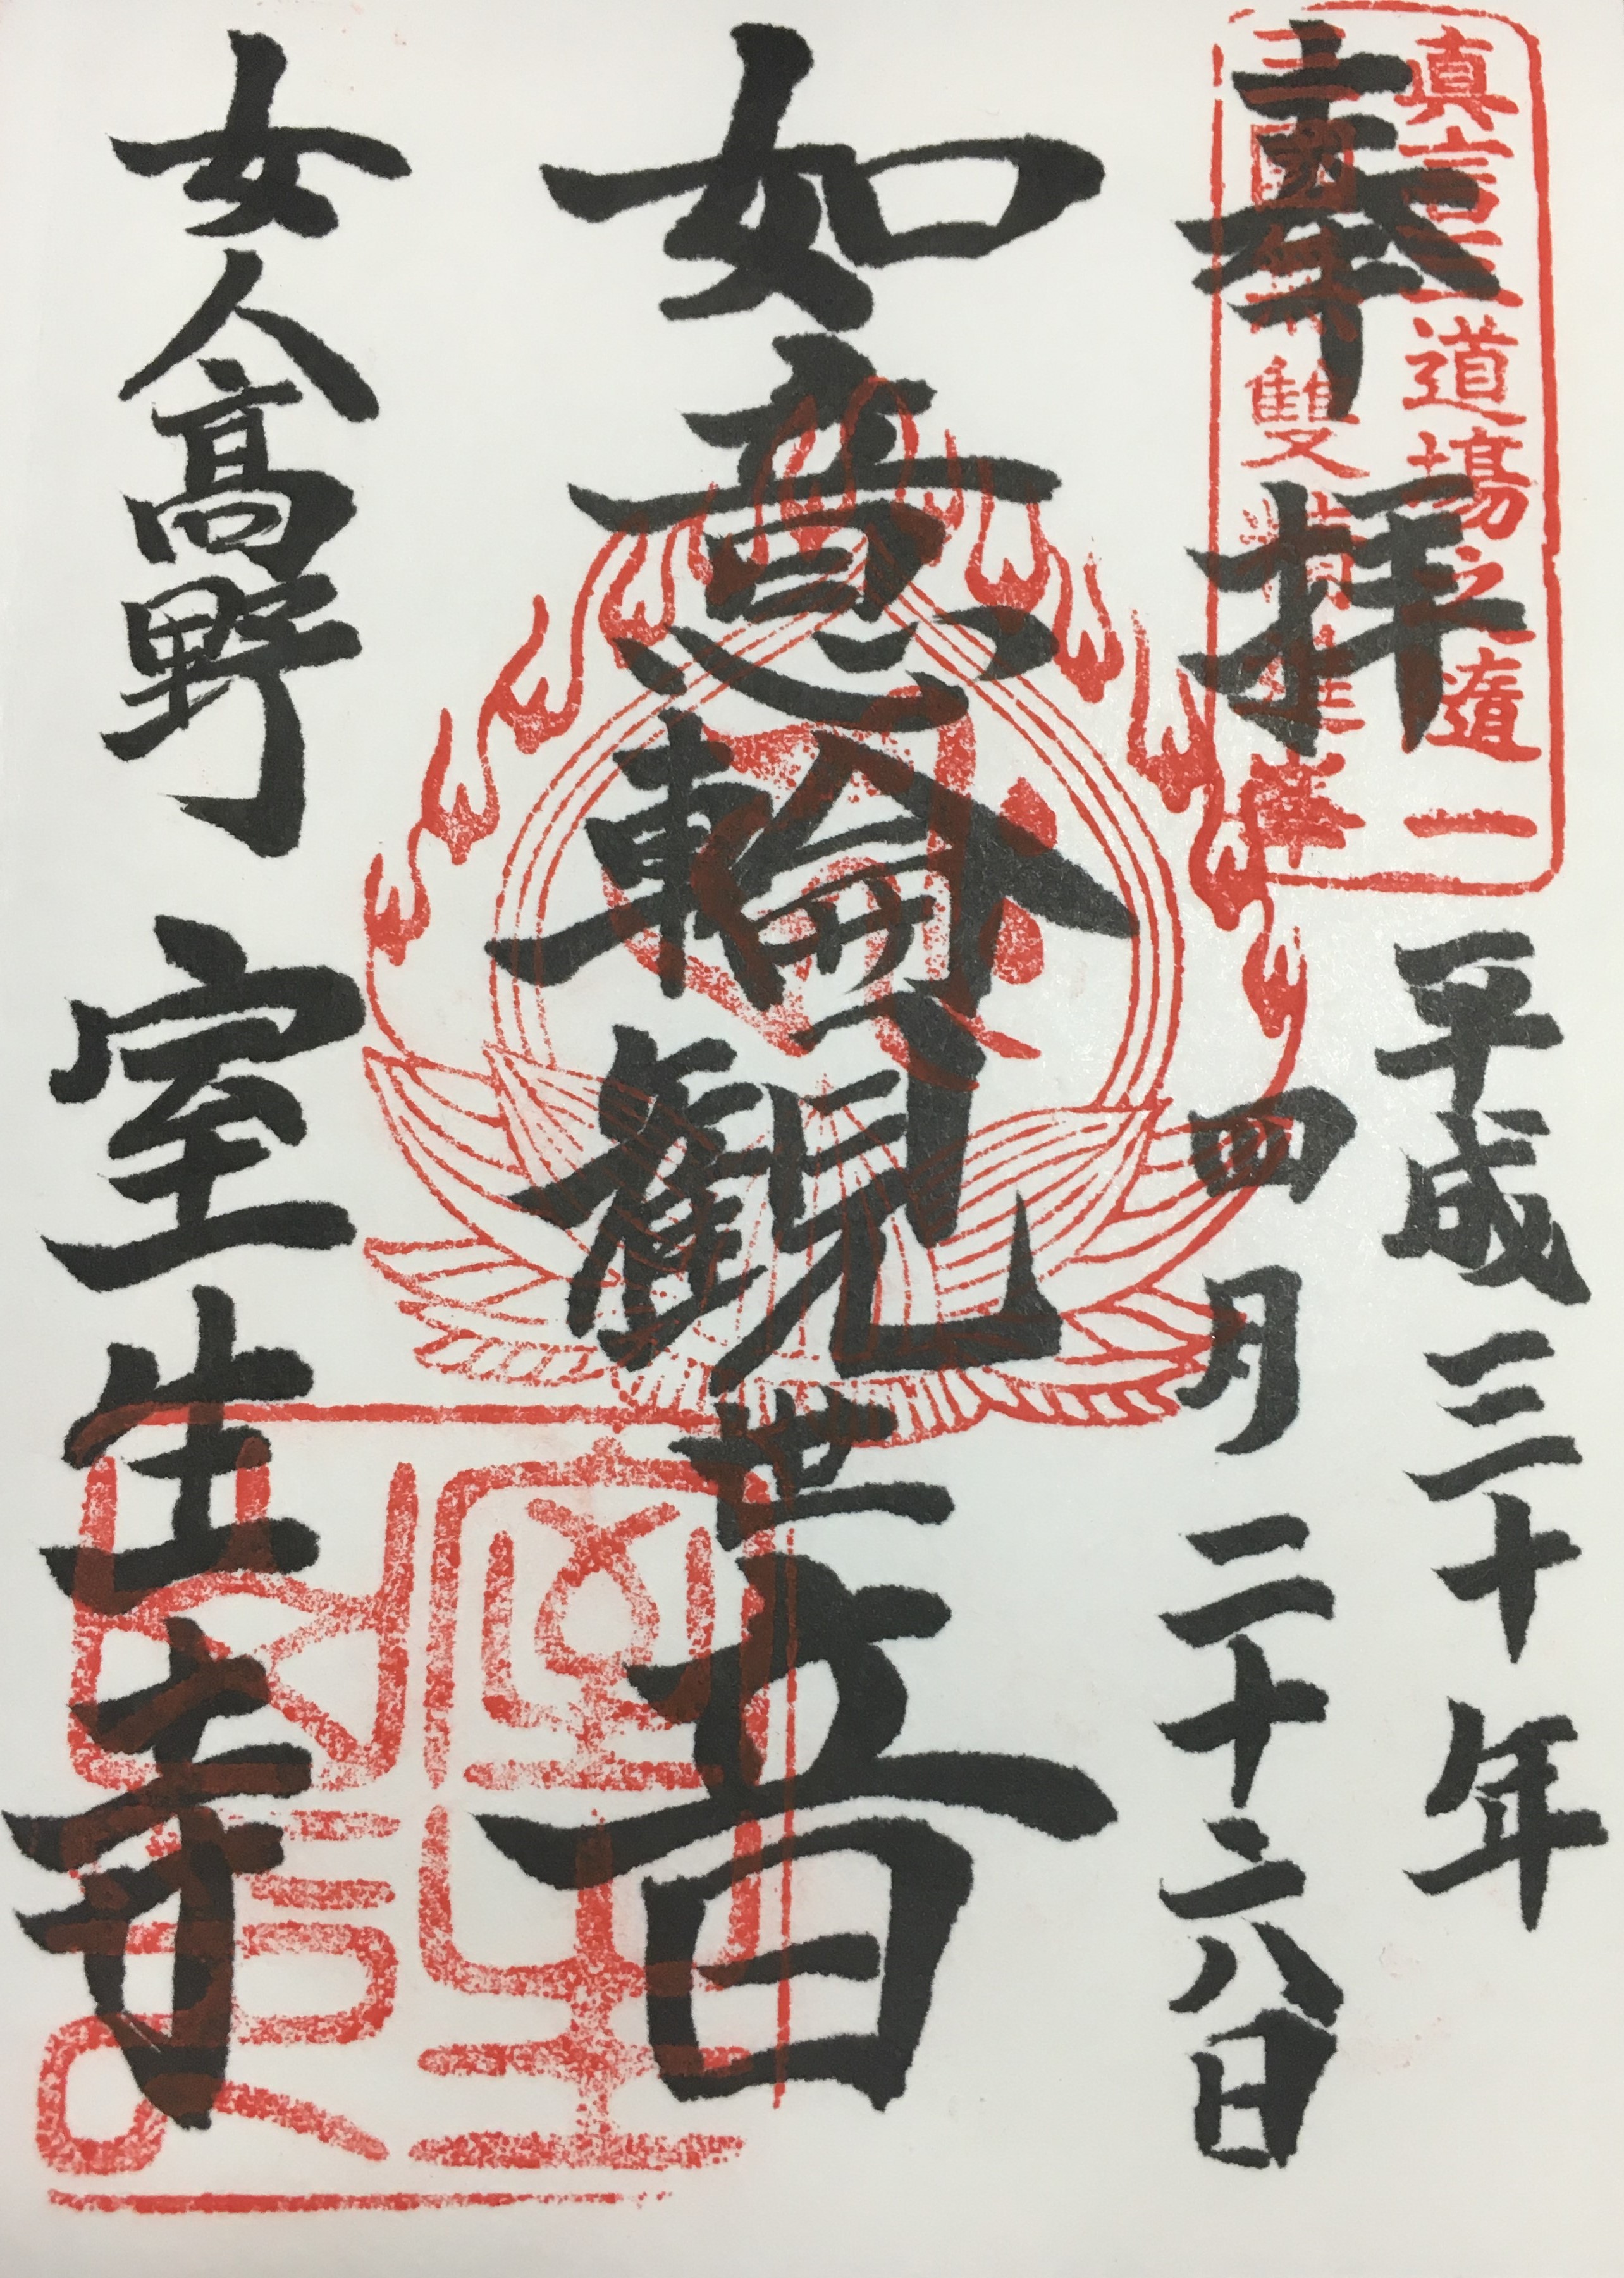 temple stamp that shows the nengo "Heisei"